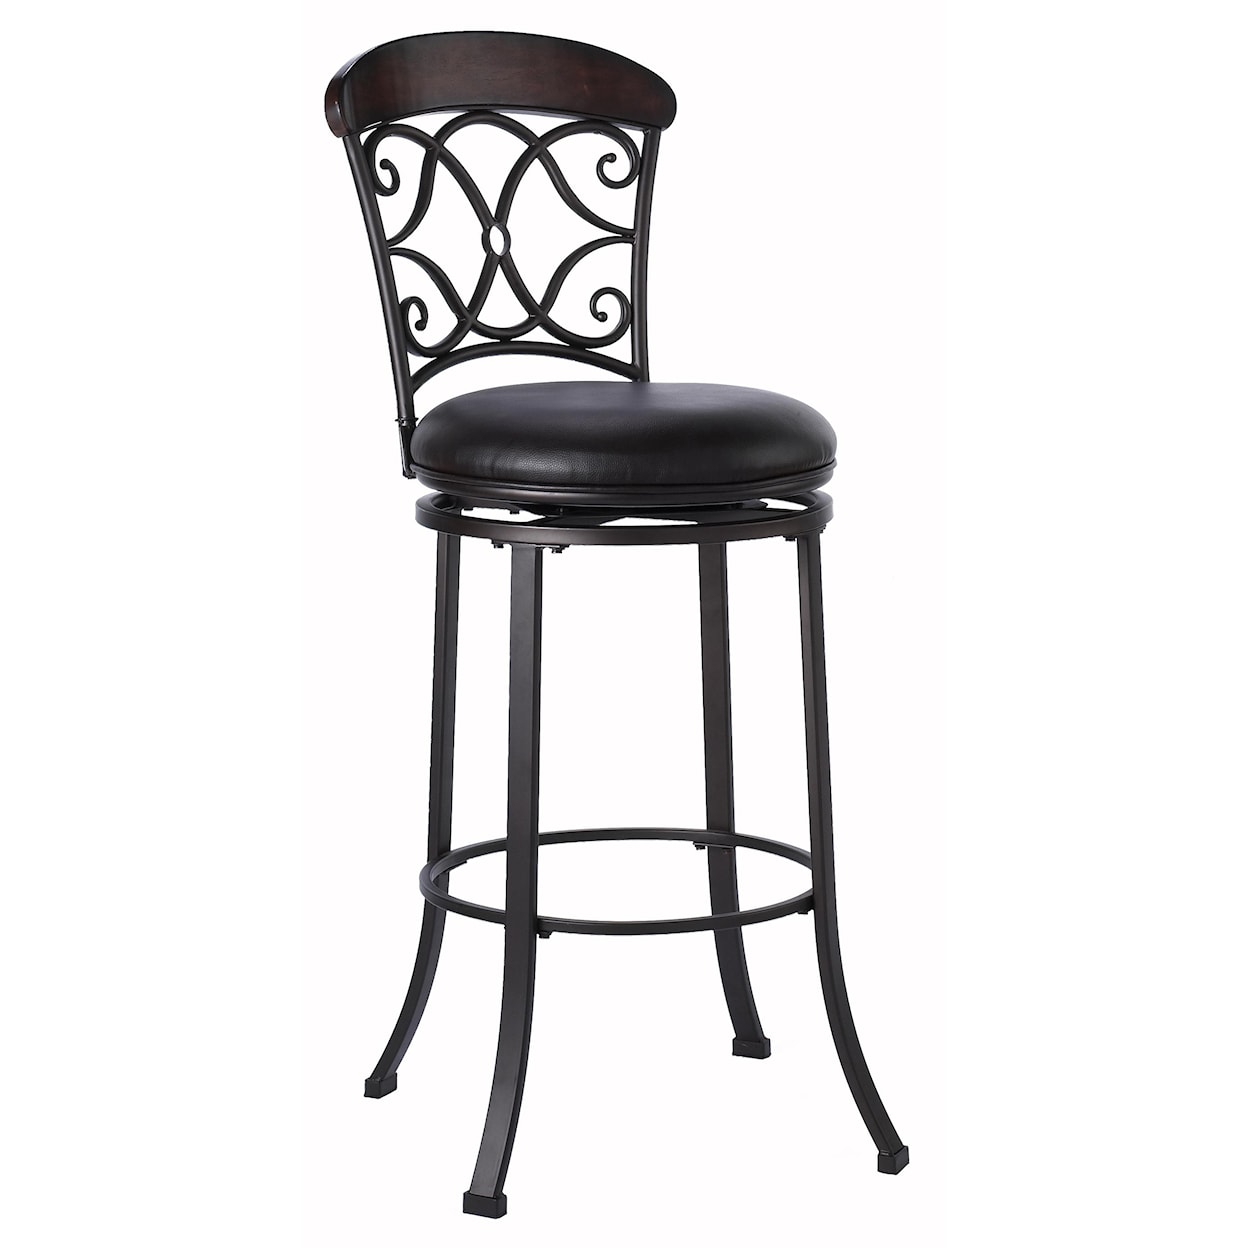 Hillsdale Bar Stools Counter Height Swivel Stool